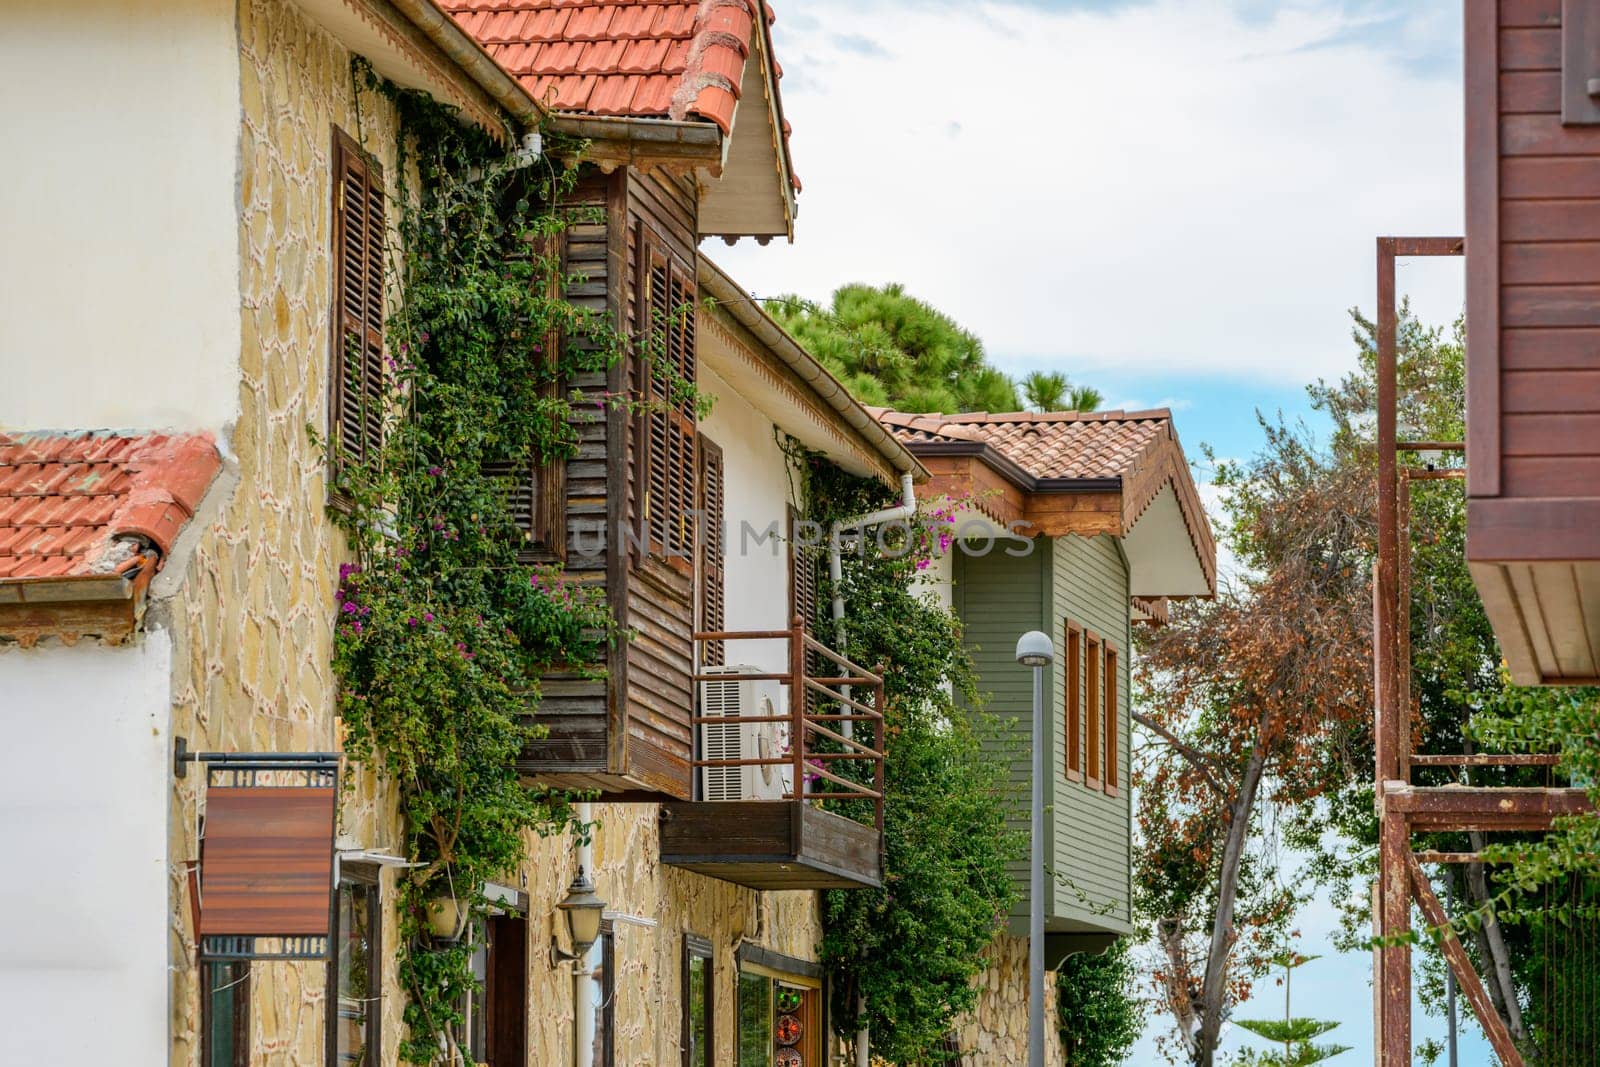 Restored houses with bay windows on the historical streets of Side Antalya by Sonat